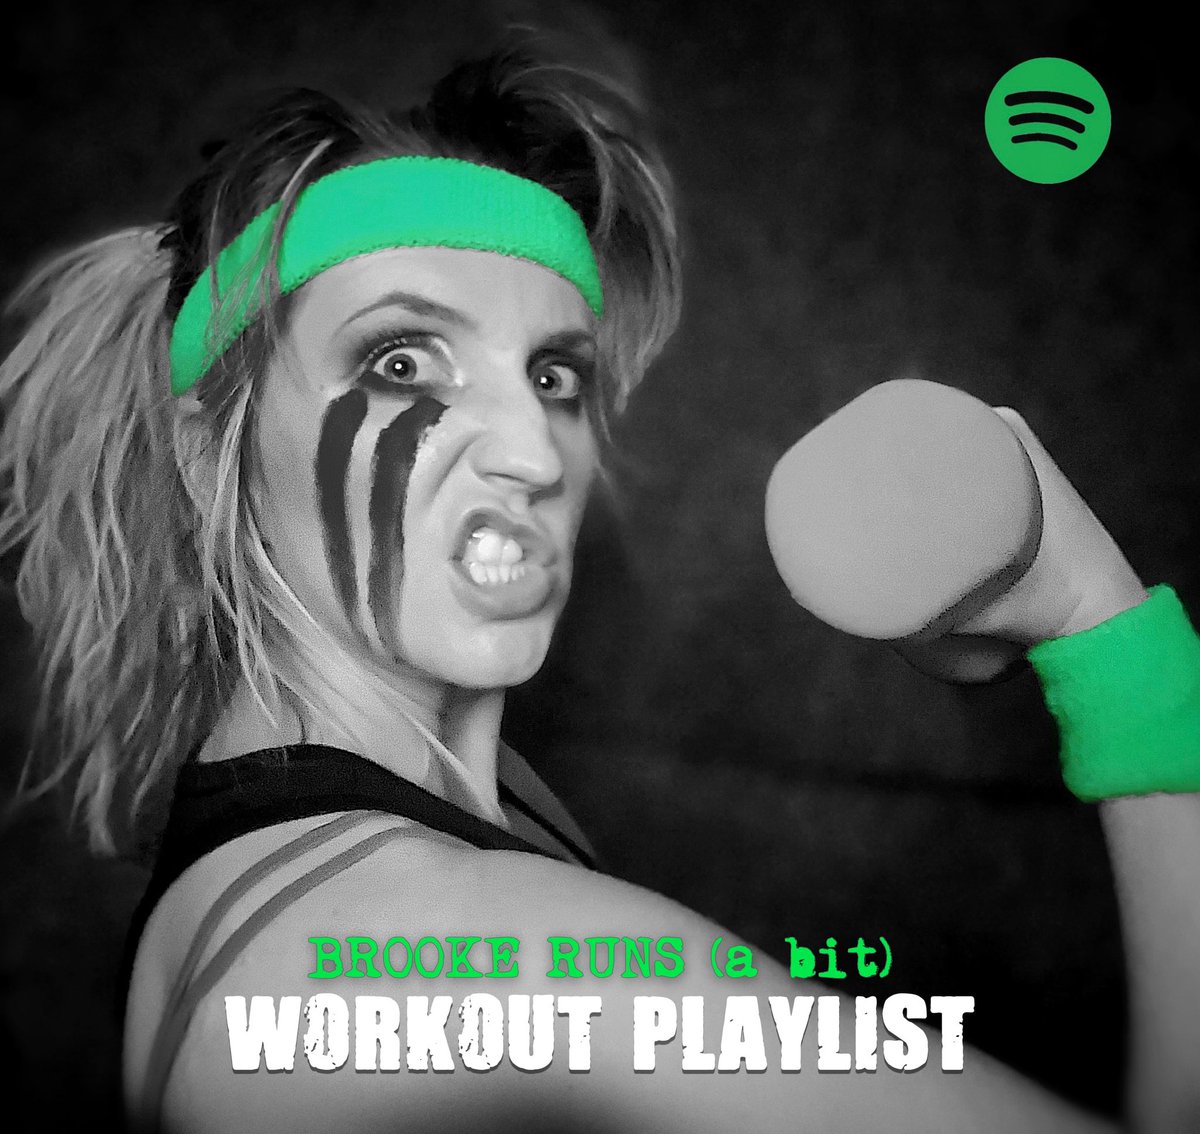 Need some Monday motivation? 💪💪 Stick this playlist on shuffle and get that heart a pumpin’! 🏃‍♀️ 👉 open.spotify.com/playlist/1aleb… Including: @Skindredmusic @thesubways @STRANGEBONES @clintlowerynet @TURNSTILEHC @Highly_Suspect @thevirginmarys @calvalouise @SkunkAnansie +more